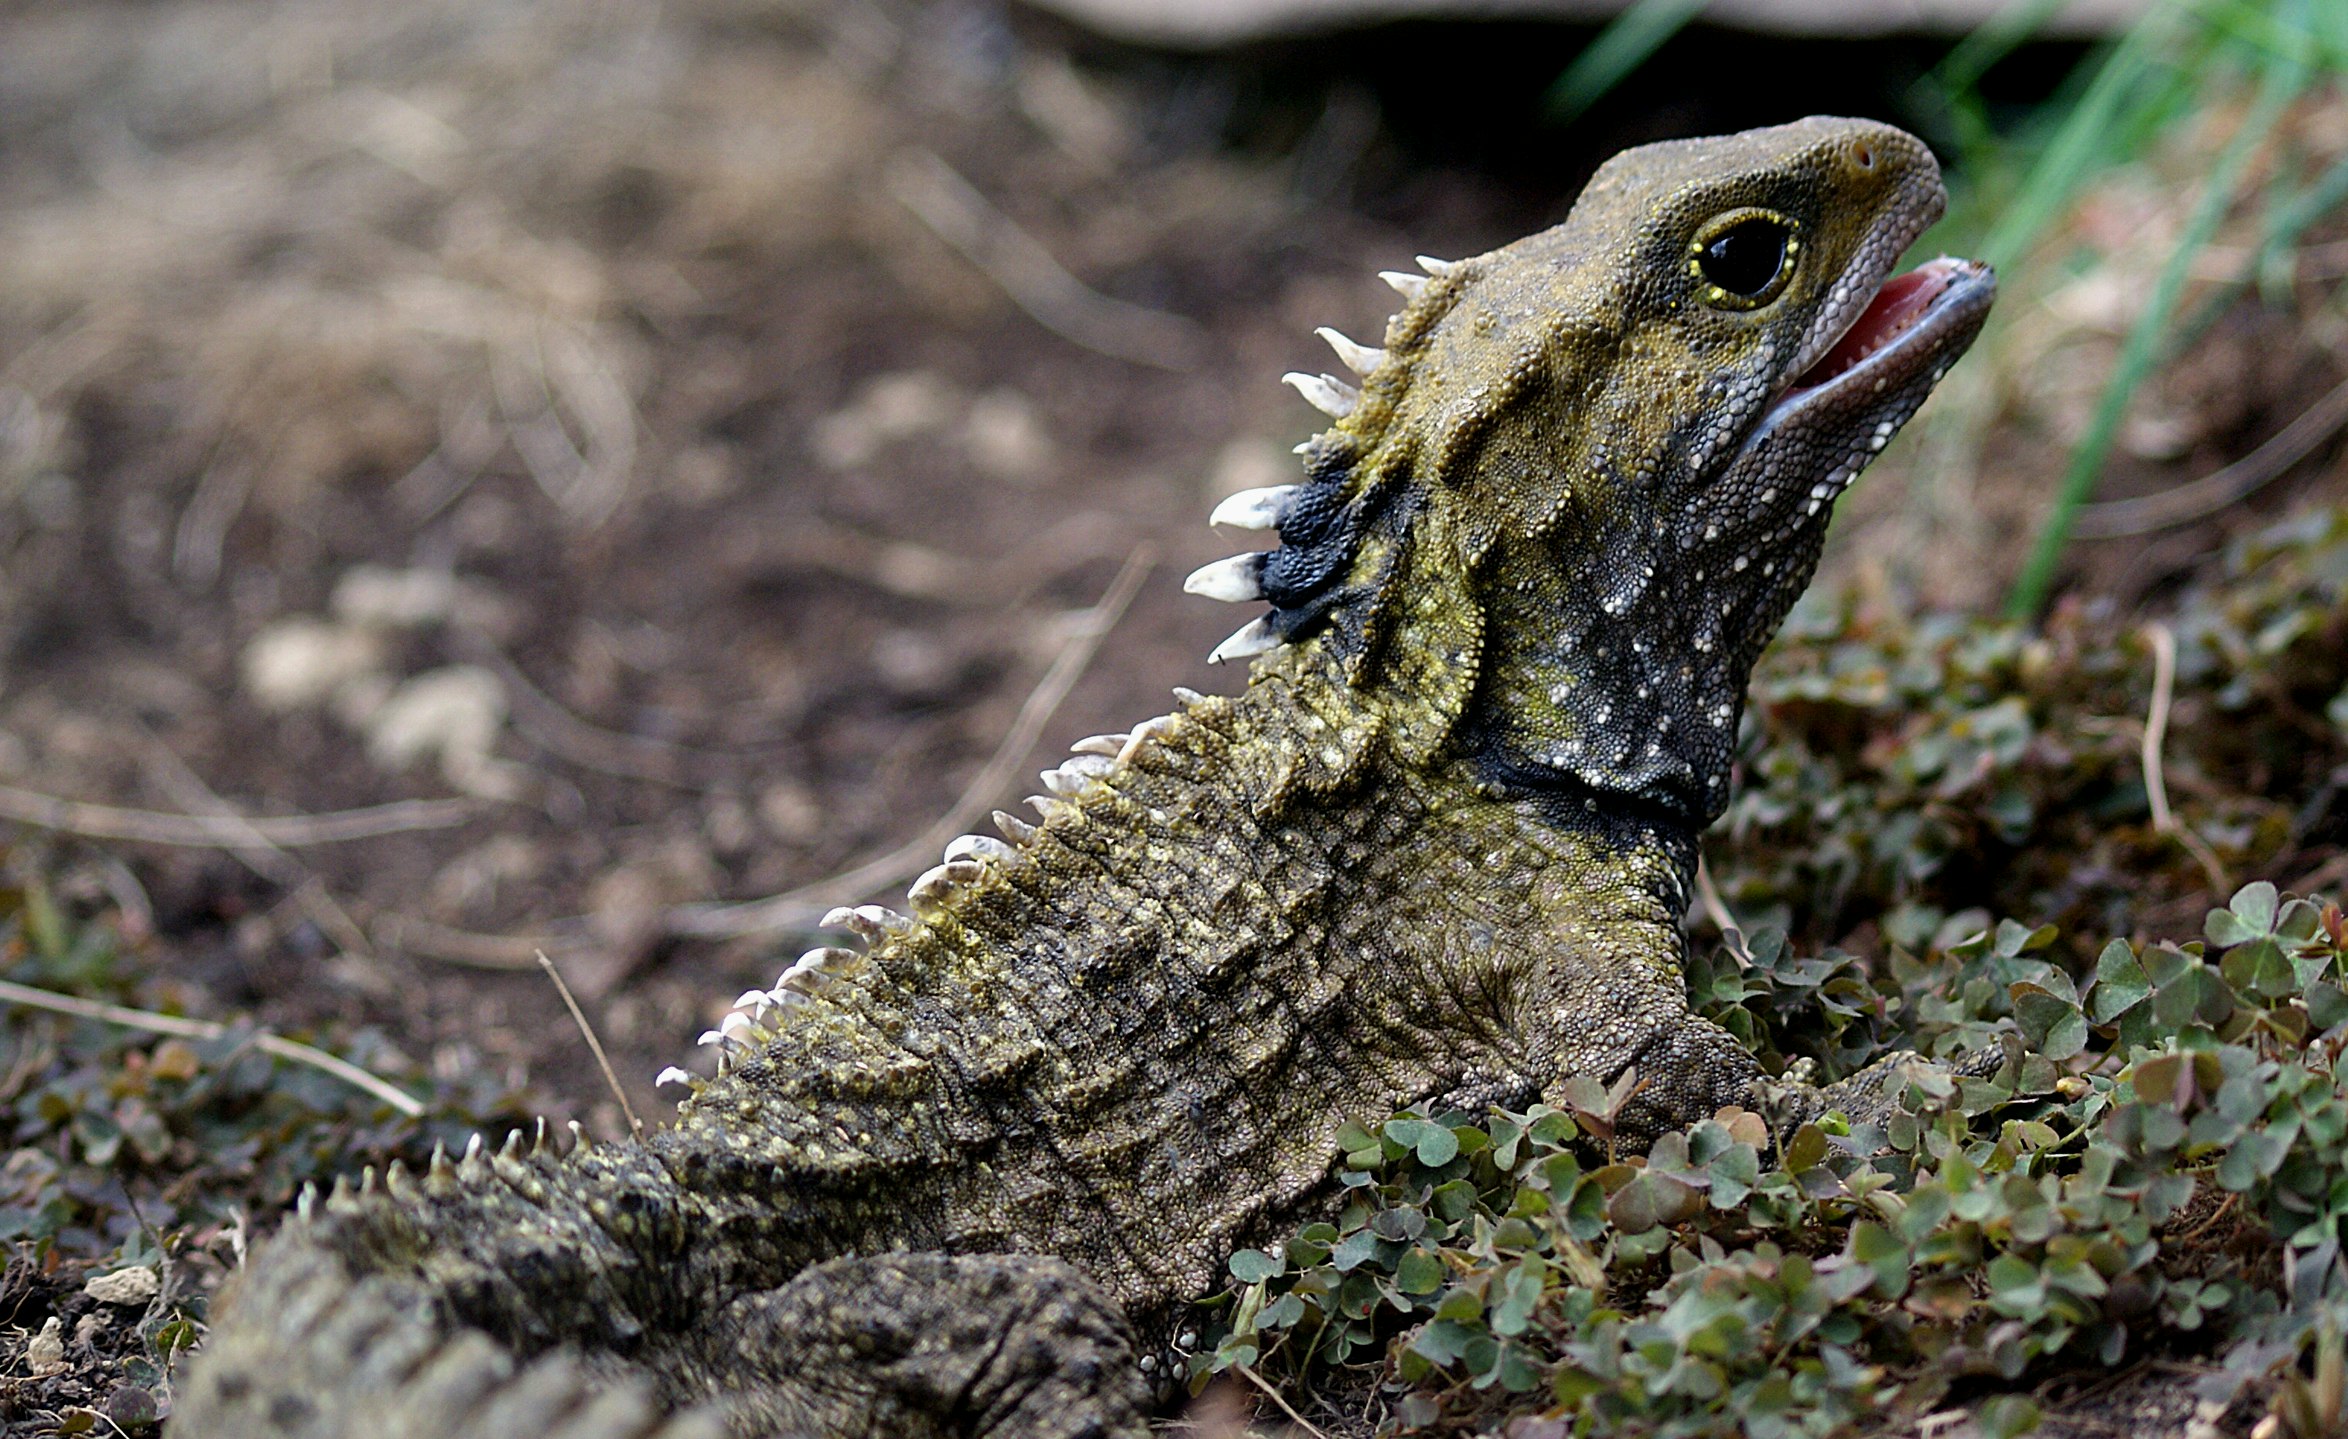 A lizard-like reptile with white spines on its back and head is standing on rocks and moss.